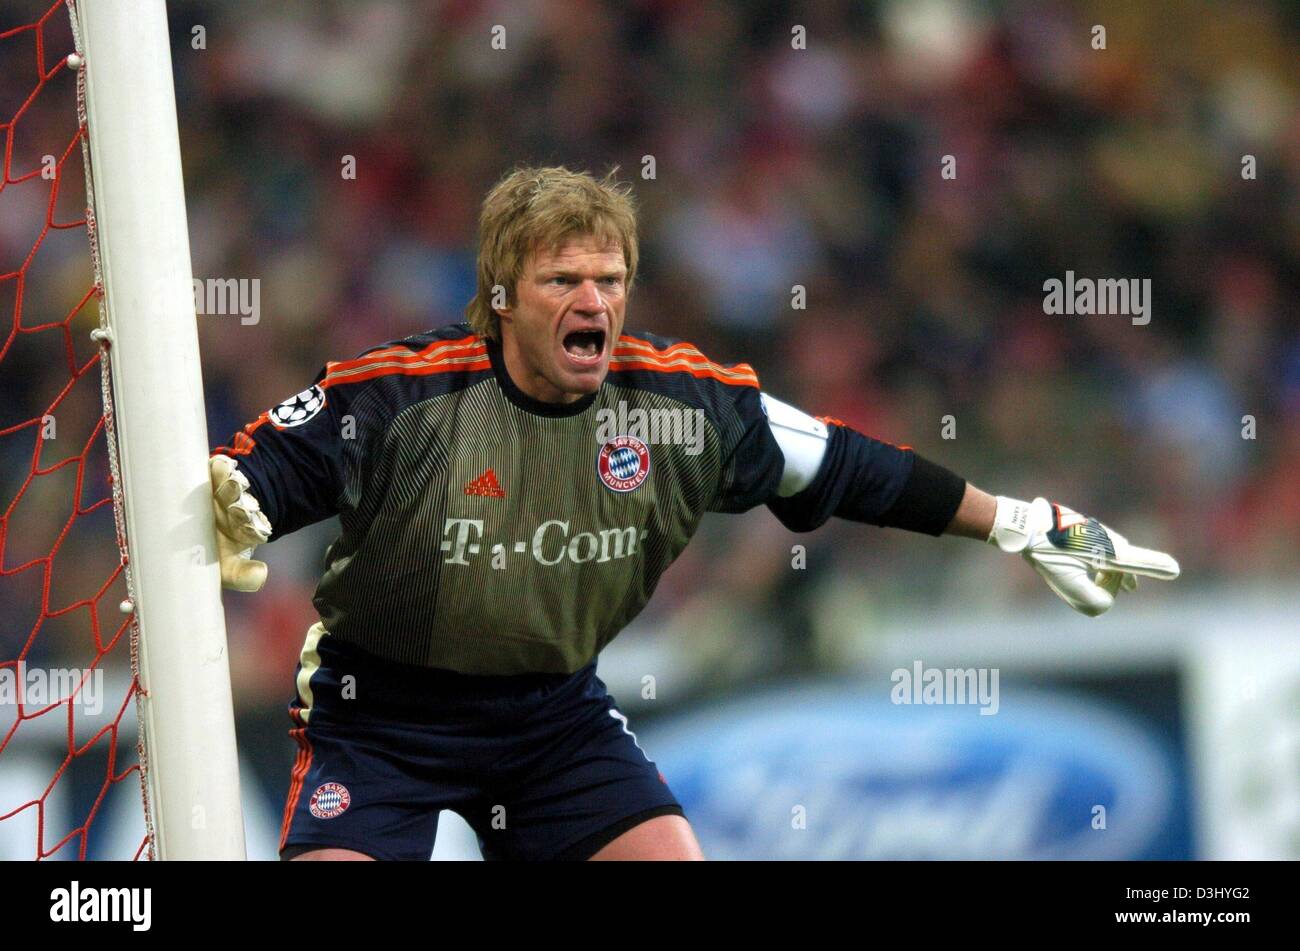 (dpa) Oliver Kahn in action during the Champions League match Bayern Munich vs. Real Madrid, the goalie of the German soccer club FC Bayern Munich missed the decisive goal in the match vs. Real Madrid on Tuesday, 24 February 2004 in Munich. The game ended in 1:1 draw. Stock Photo